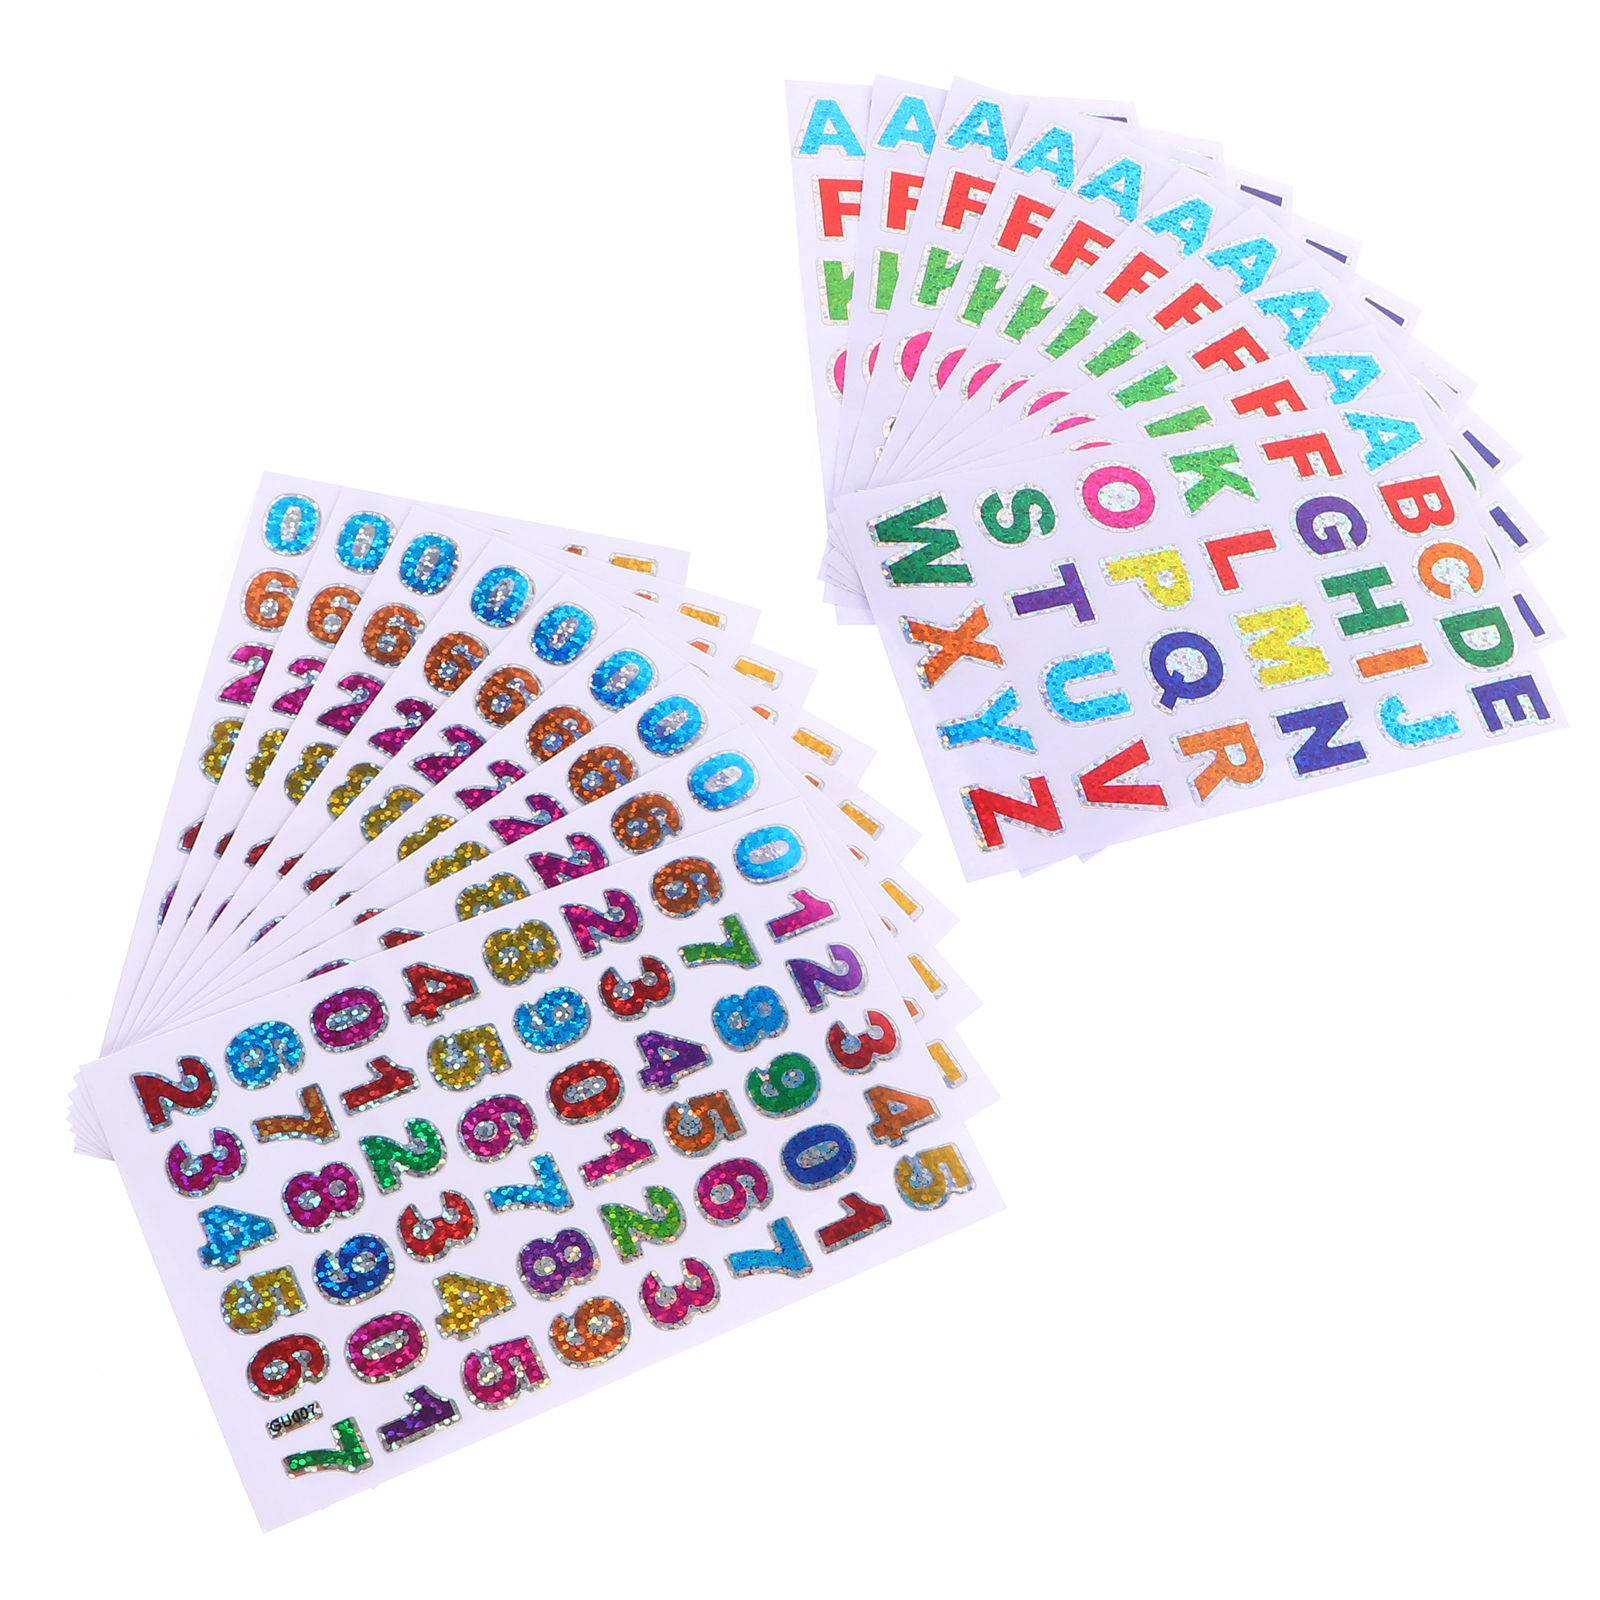 80 Sheets Glitter Letter Stickers Self Adhesive Number Alphabet Stickers 